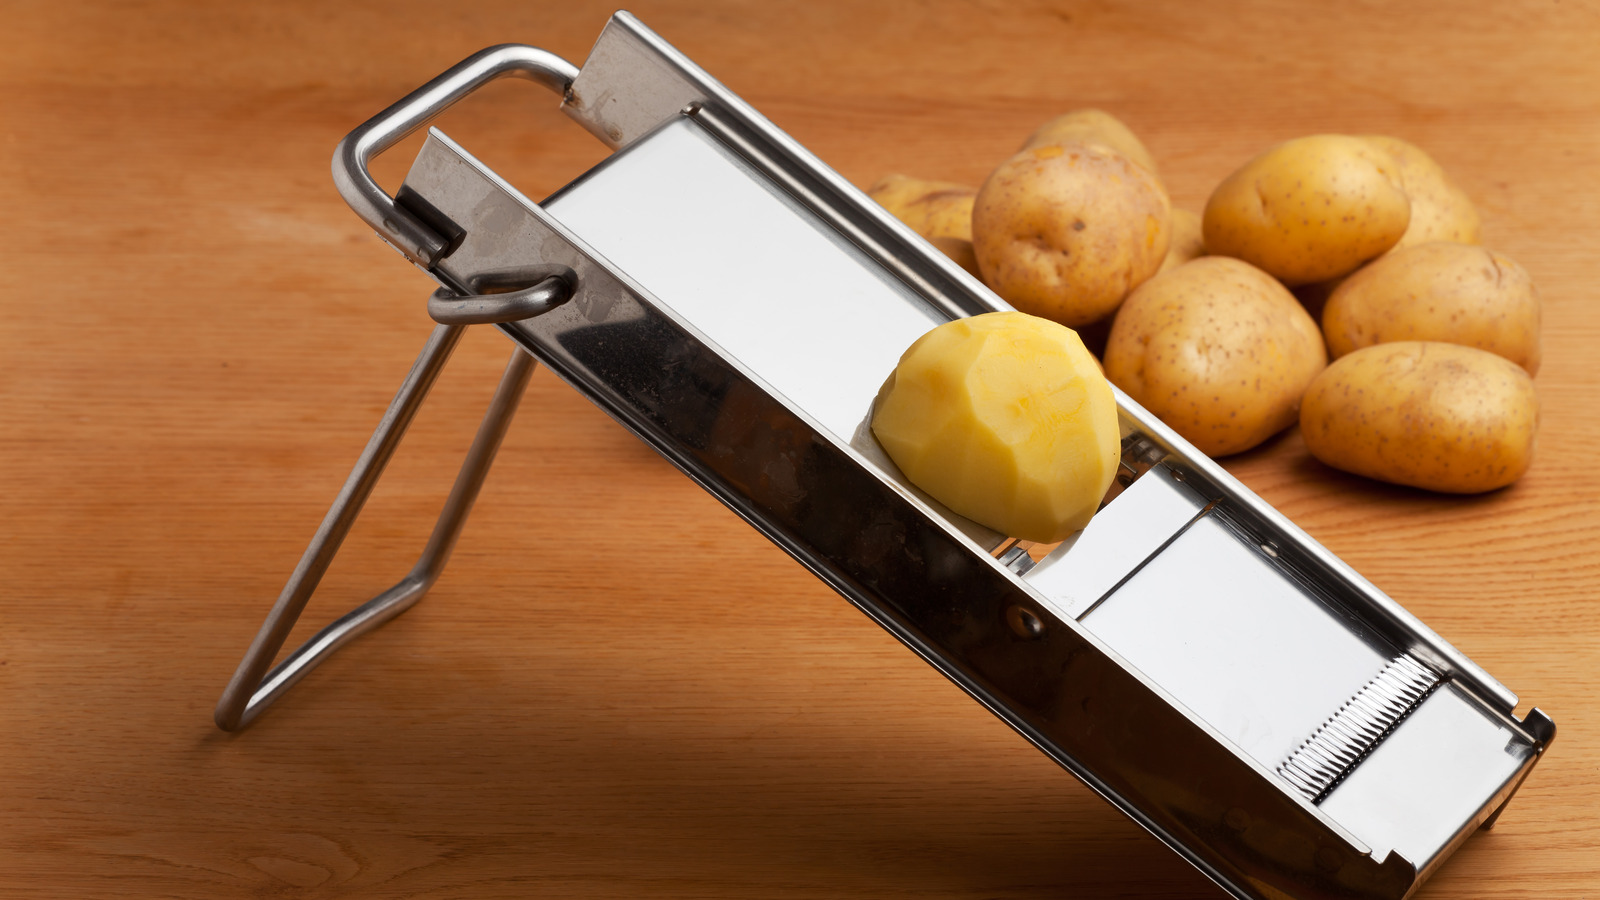 https://www.thedailymeal.com/img/gallery/why-you-need-a-mandoline-for-perfect-potato-pave/l-intro-1701189042.jpg